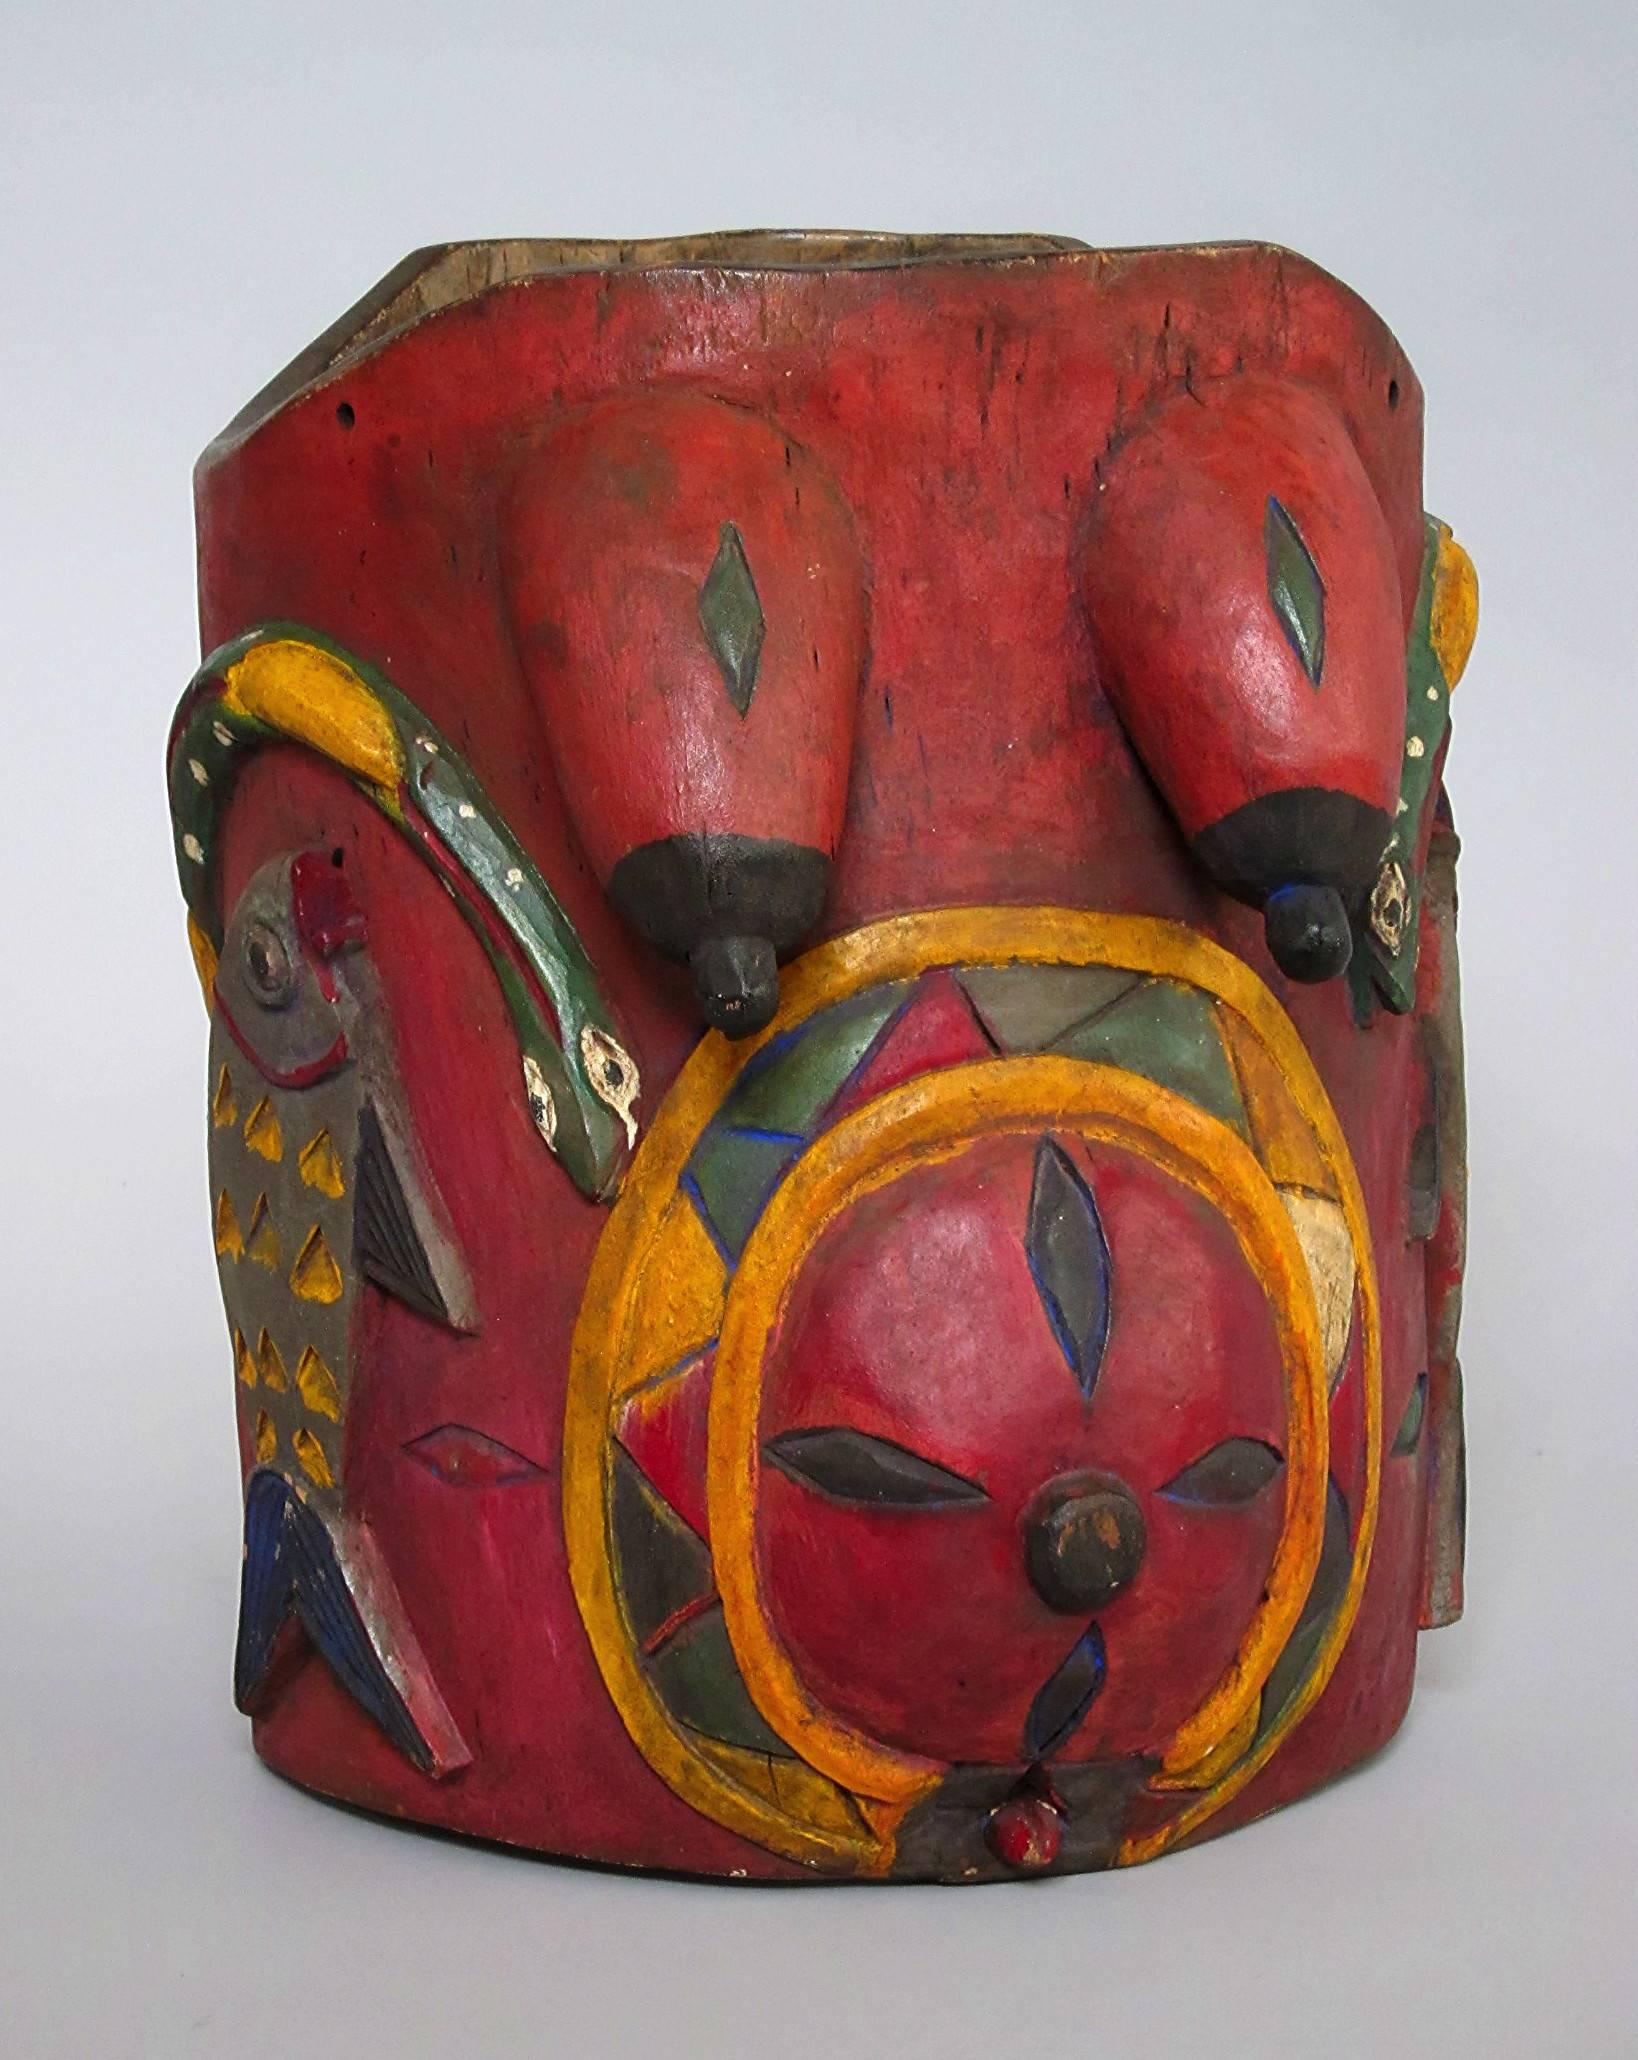 Hand-carved wooden Yoruba Gelede bund body mask for ritual male dancers,
strong colors, Nigeria Africa, 20th century.